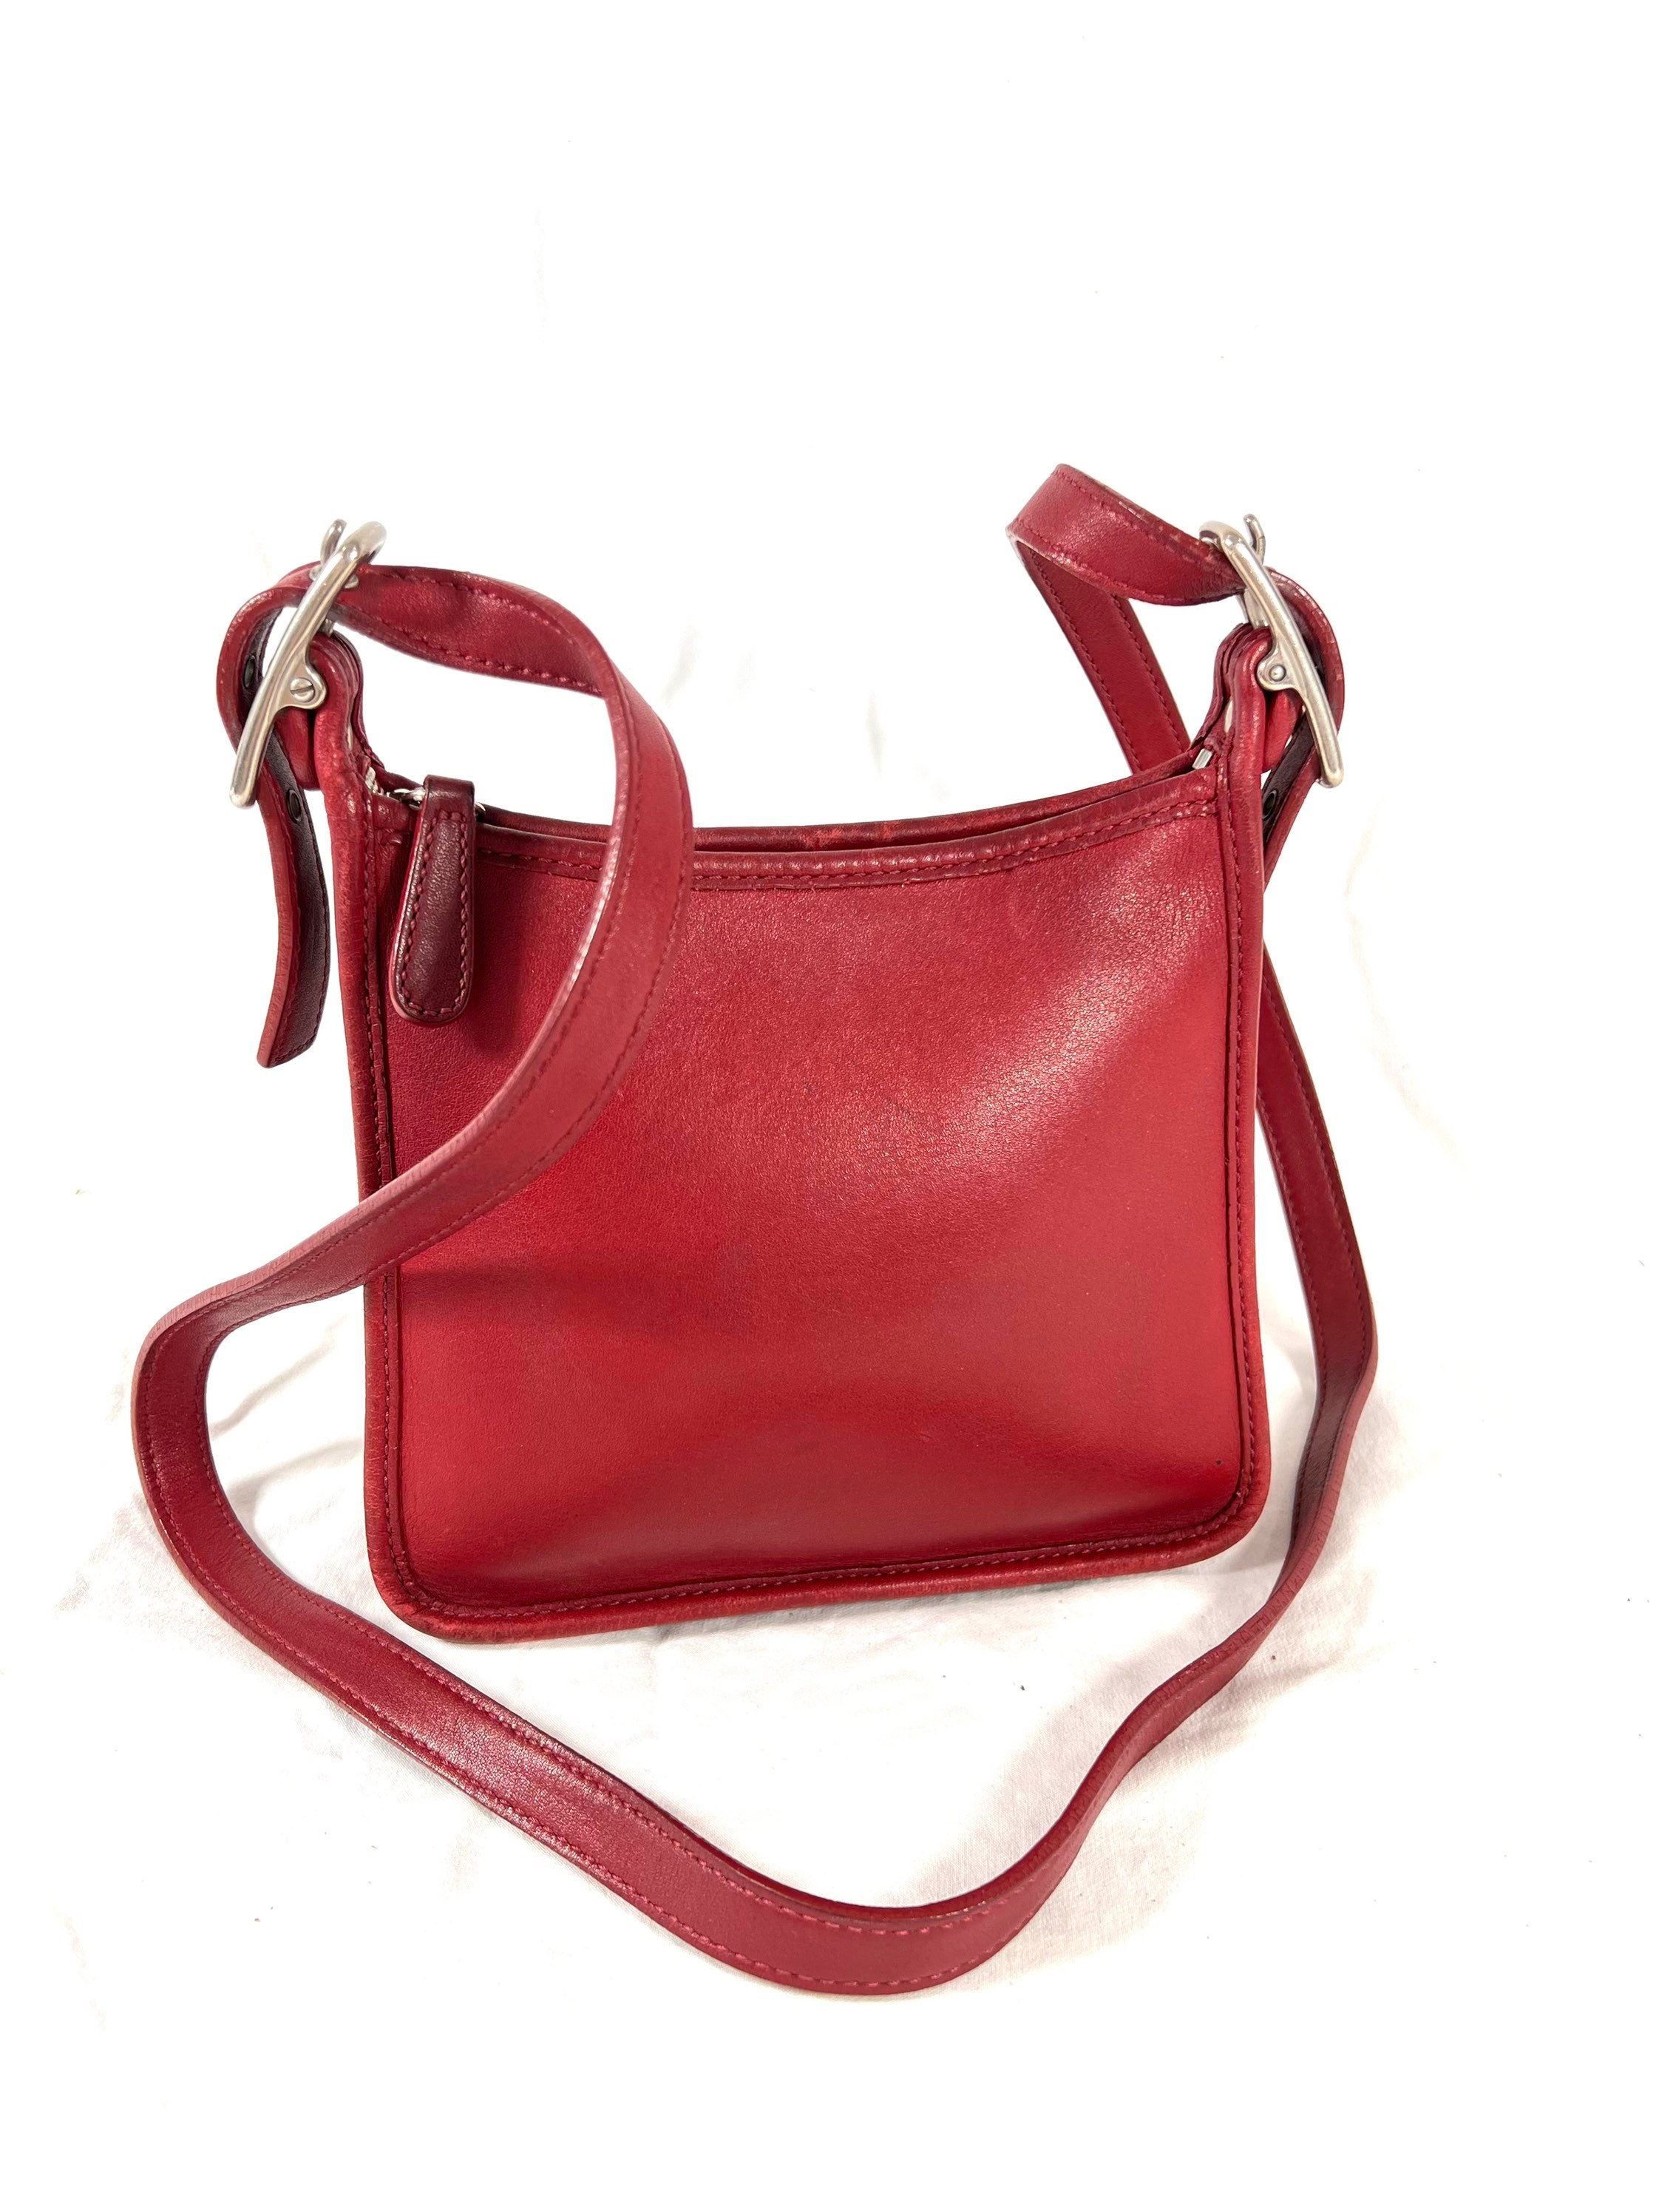 SALE Coach Dinky Bag in Red Leather and Brass Hardware Crossbody Strap  Style 9375 Made in the Factory in New York City VGC 